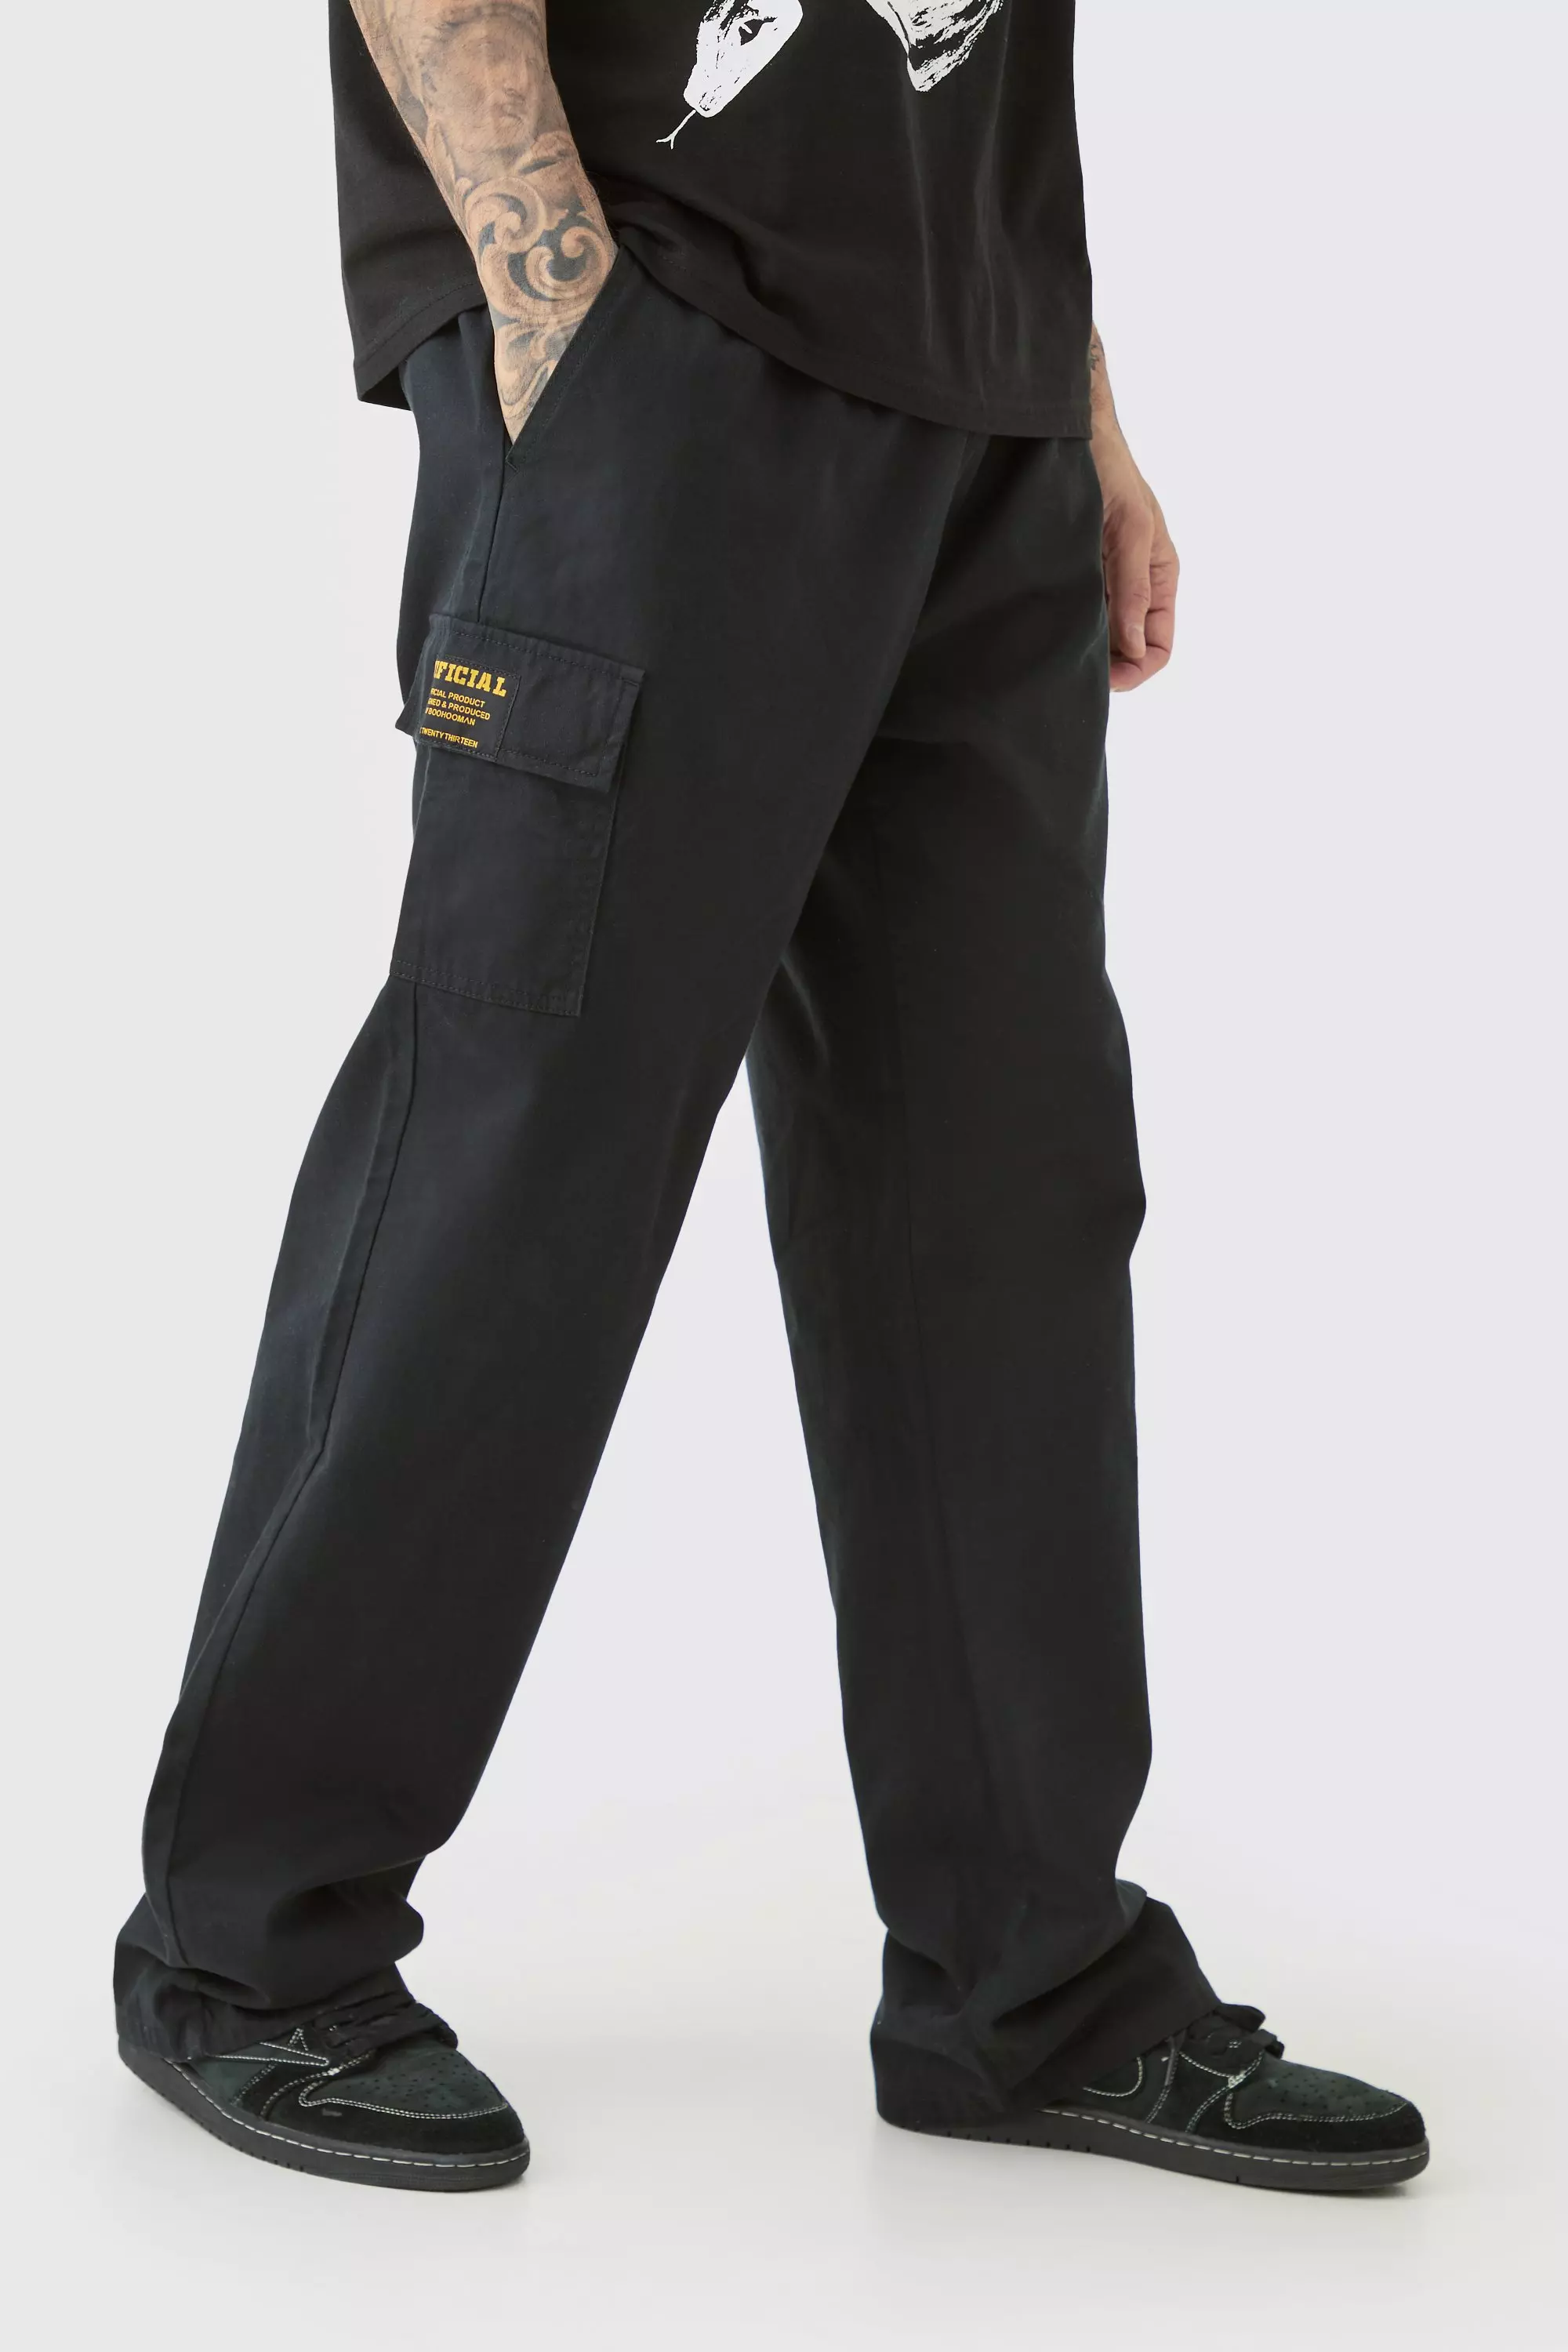 Tall Elastic Waist Twil Relaxed Fit Cargo Tab Trouser Black